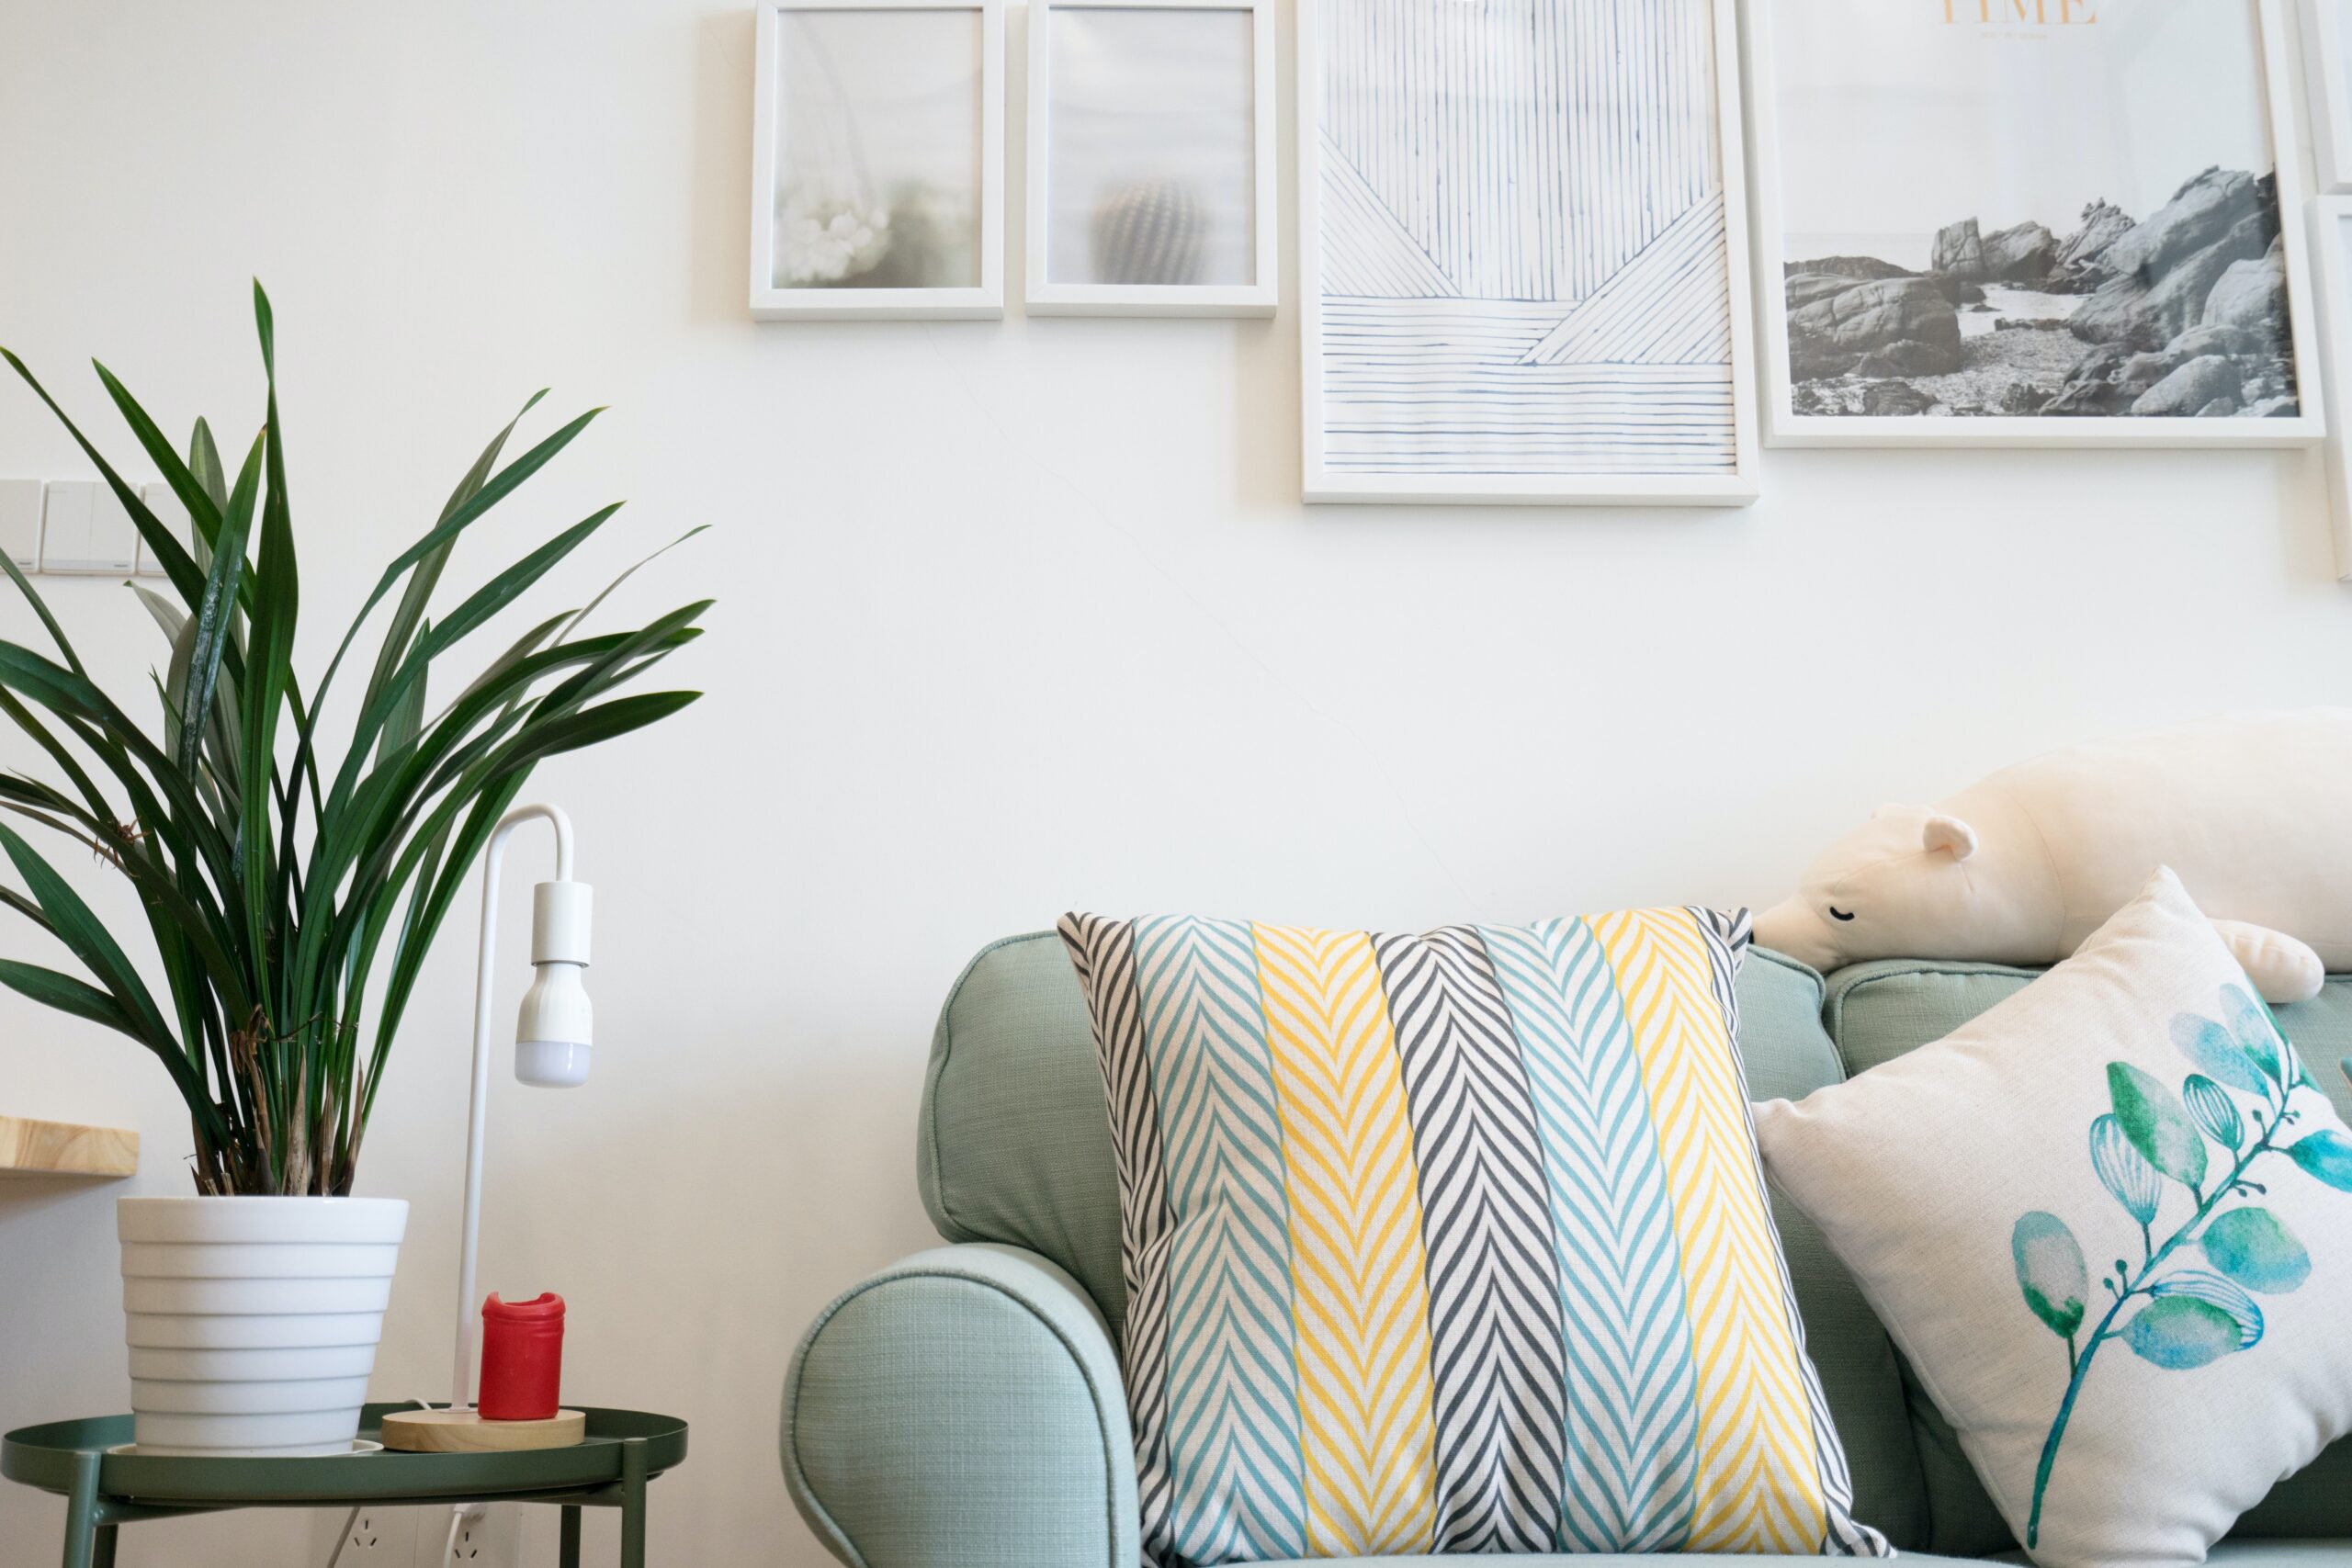 6 Tips For Making Your Home ‘Feel Like New’ For The Weekend